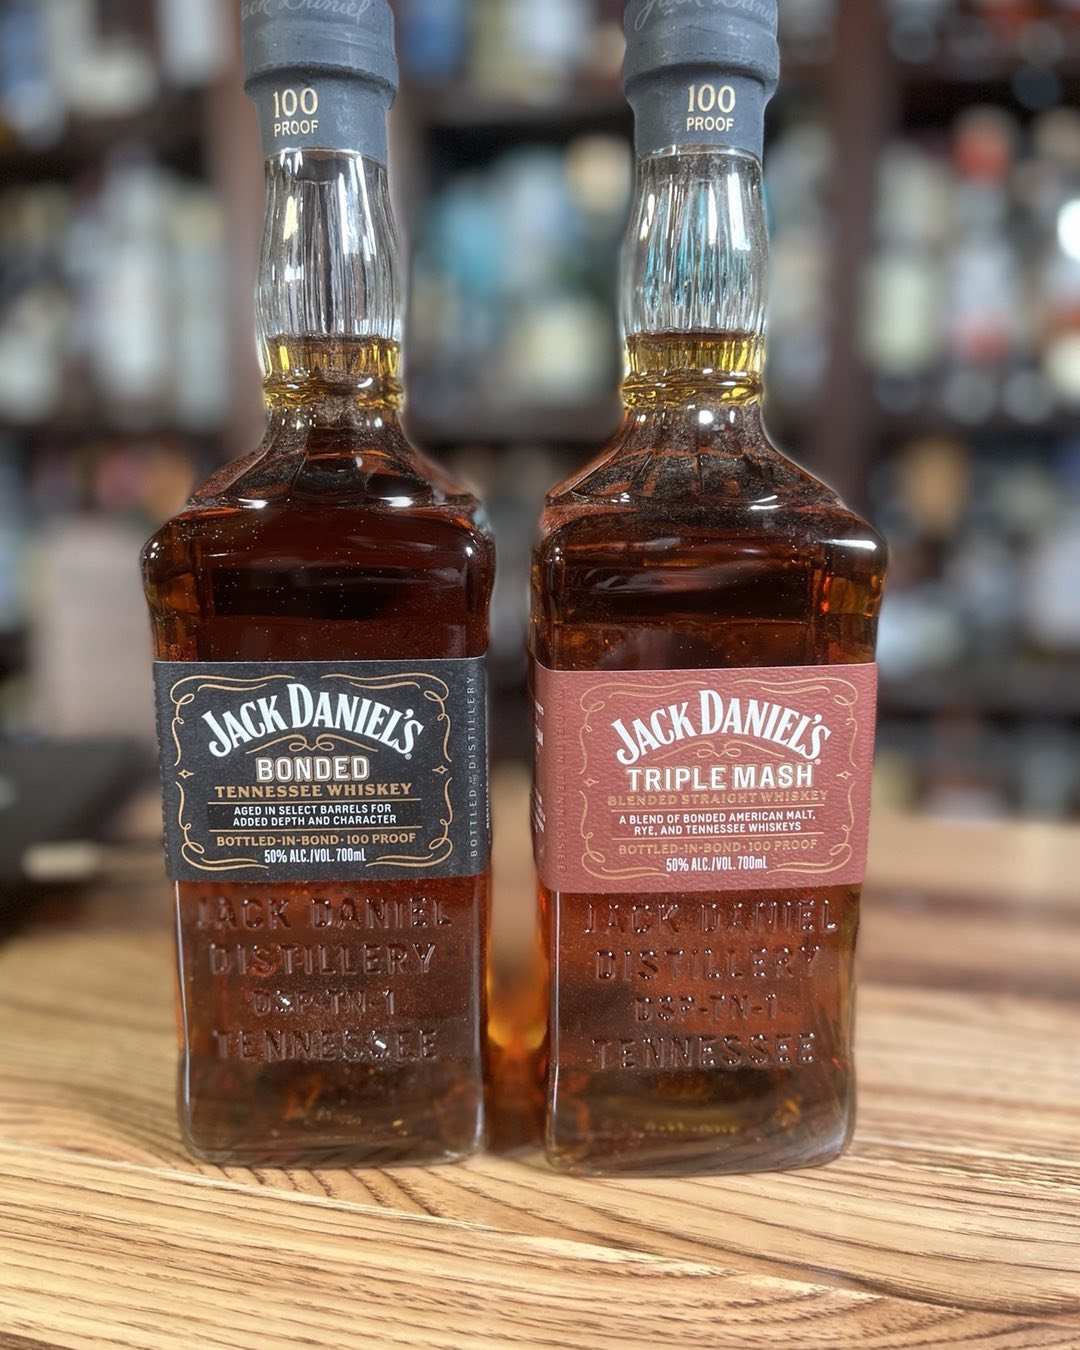 So…the Whisky Fairy just delivered these. Bottled in Bond Jack Daniel’s and a Triple Mash Bottled in Bond Jack Daniel’s made with the bonded Jack Daniel’s Tennessee Whiskey, a bonded Jack Rye, and an American MALT. That’s right…the folks in Lynchburg have been laying down malt whiskey for at least 4 years!